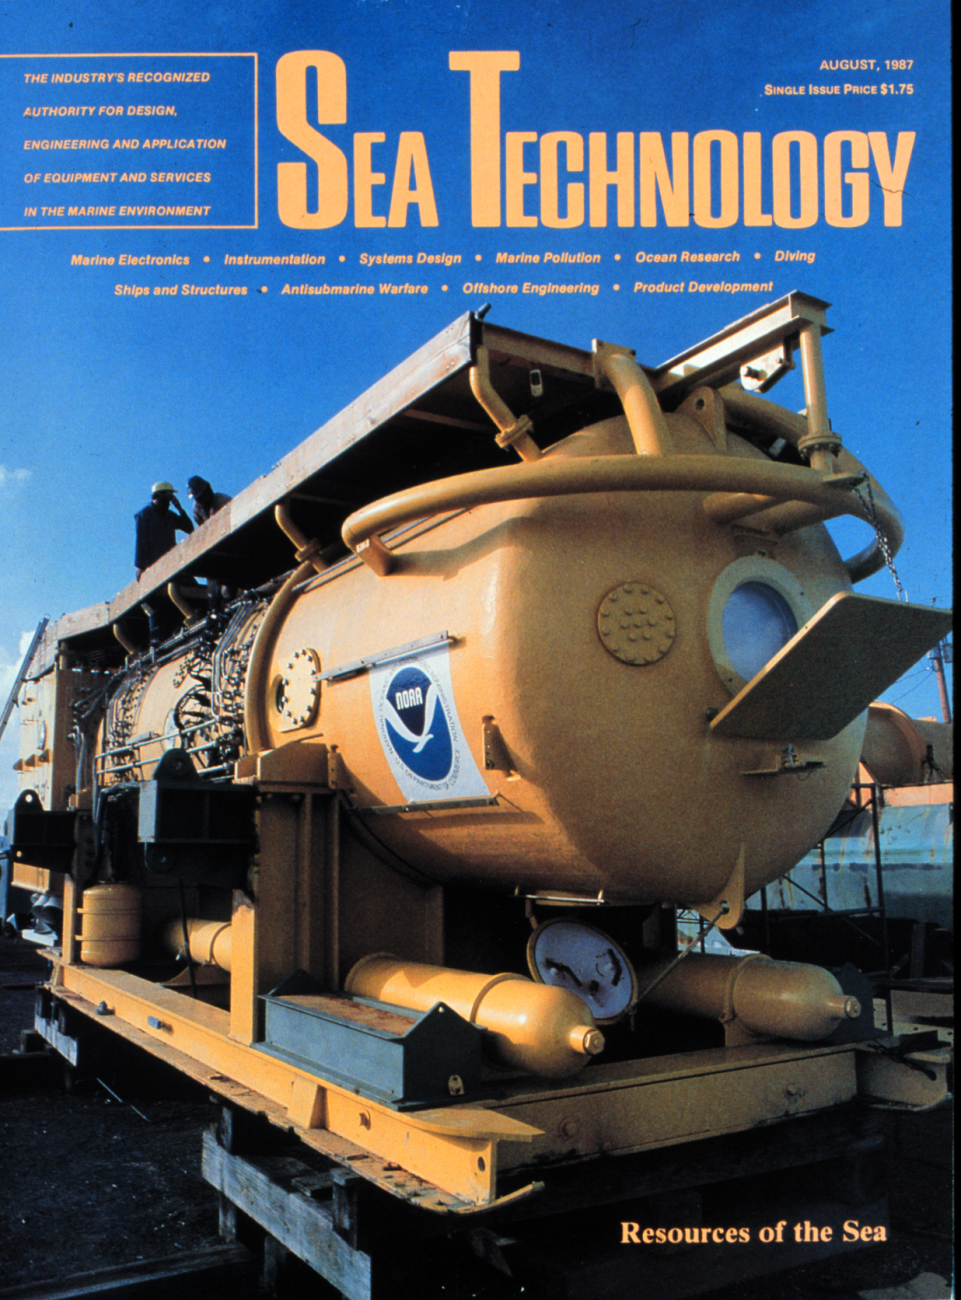 AQUARIUS featured on cover of Sea Technology prior to 1986 deployment